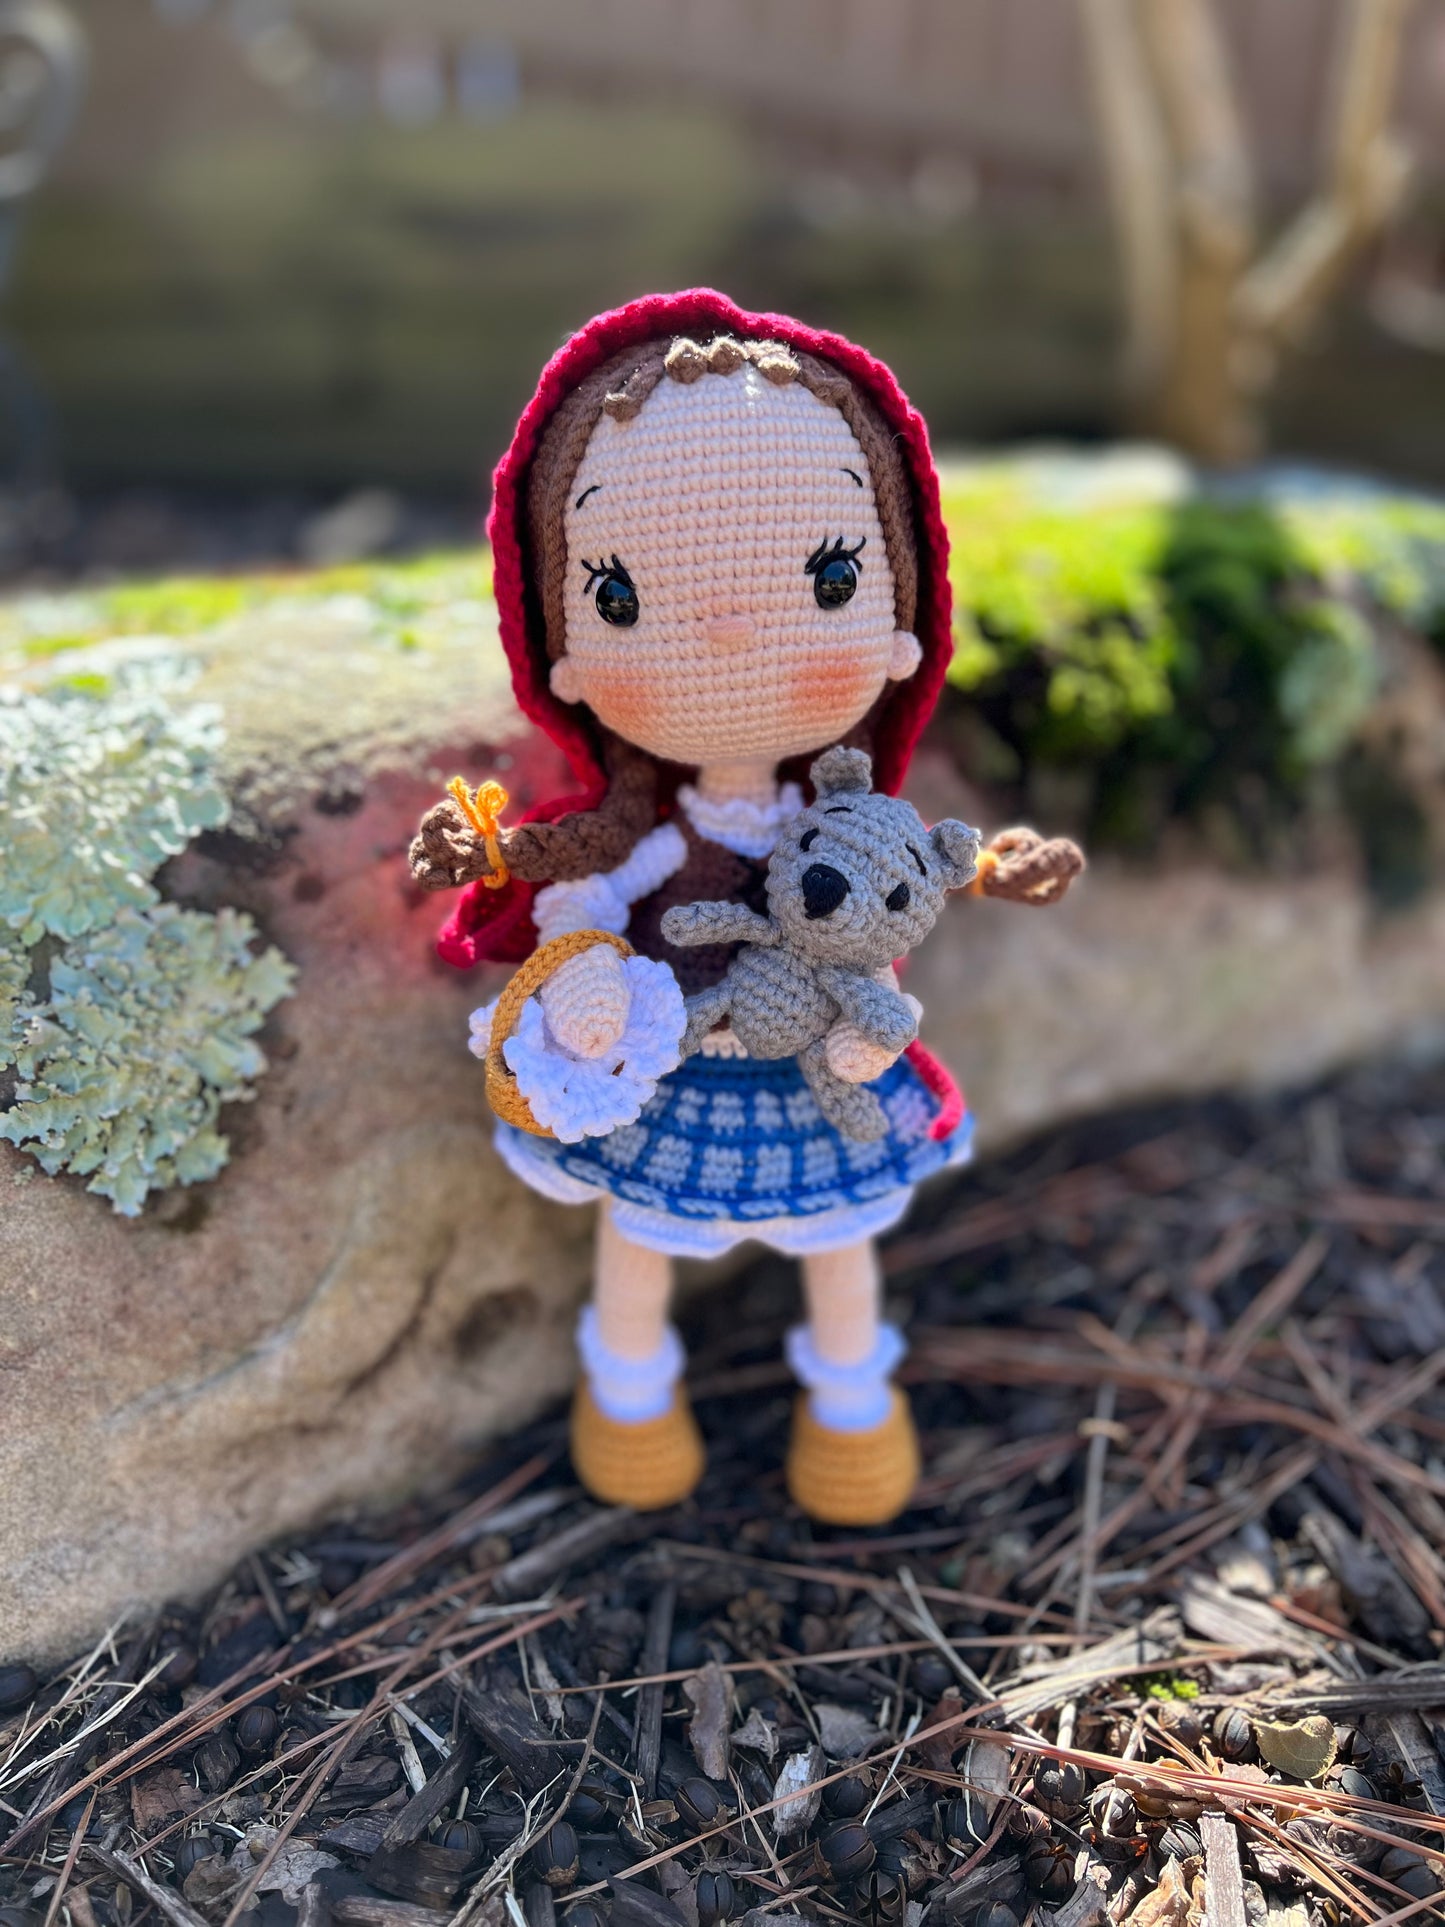 Little Red Riding Hood Amigurumi Doll, Crochet Doll, Hanmade Knitted, Ready Made, Unique Collectible Doll,Kids Gifts, Artisan Doll, Limited Edition Baby Dolls, Unique Nursery Decor